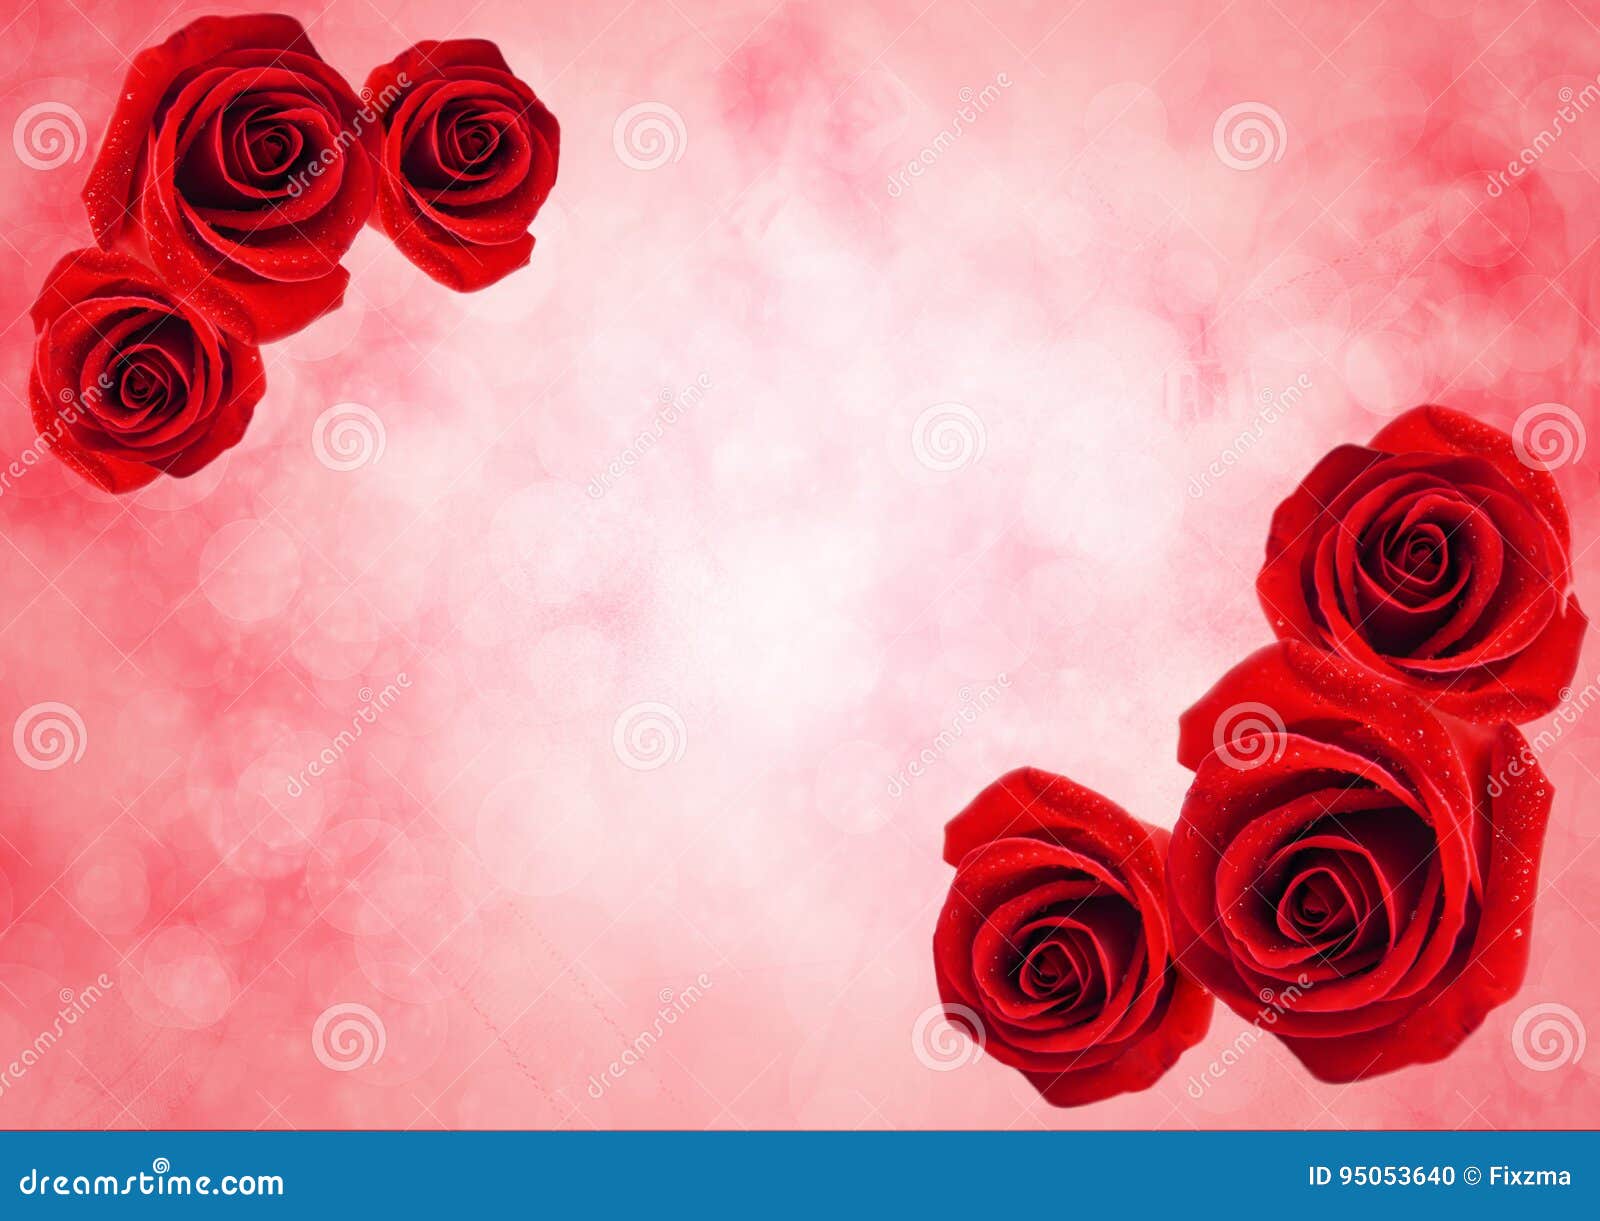 Close Up of Red Rose Flower with Bokeh Light Background Stock Photo - Image of decor, abstract: